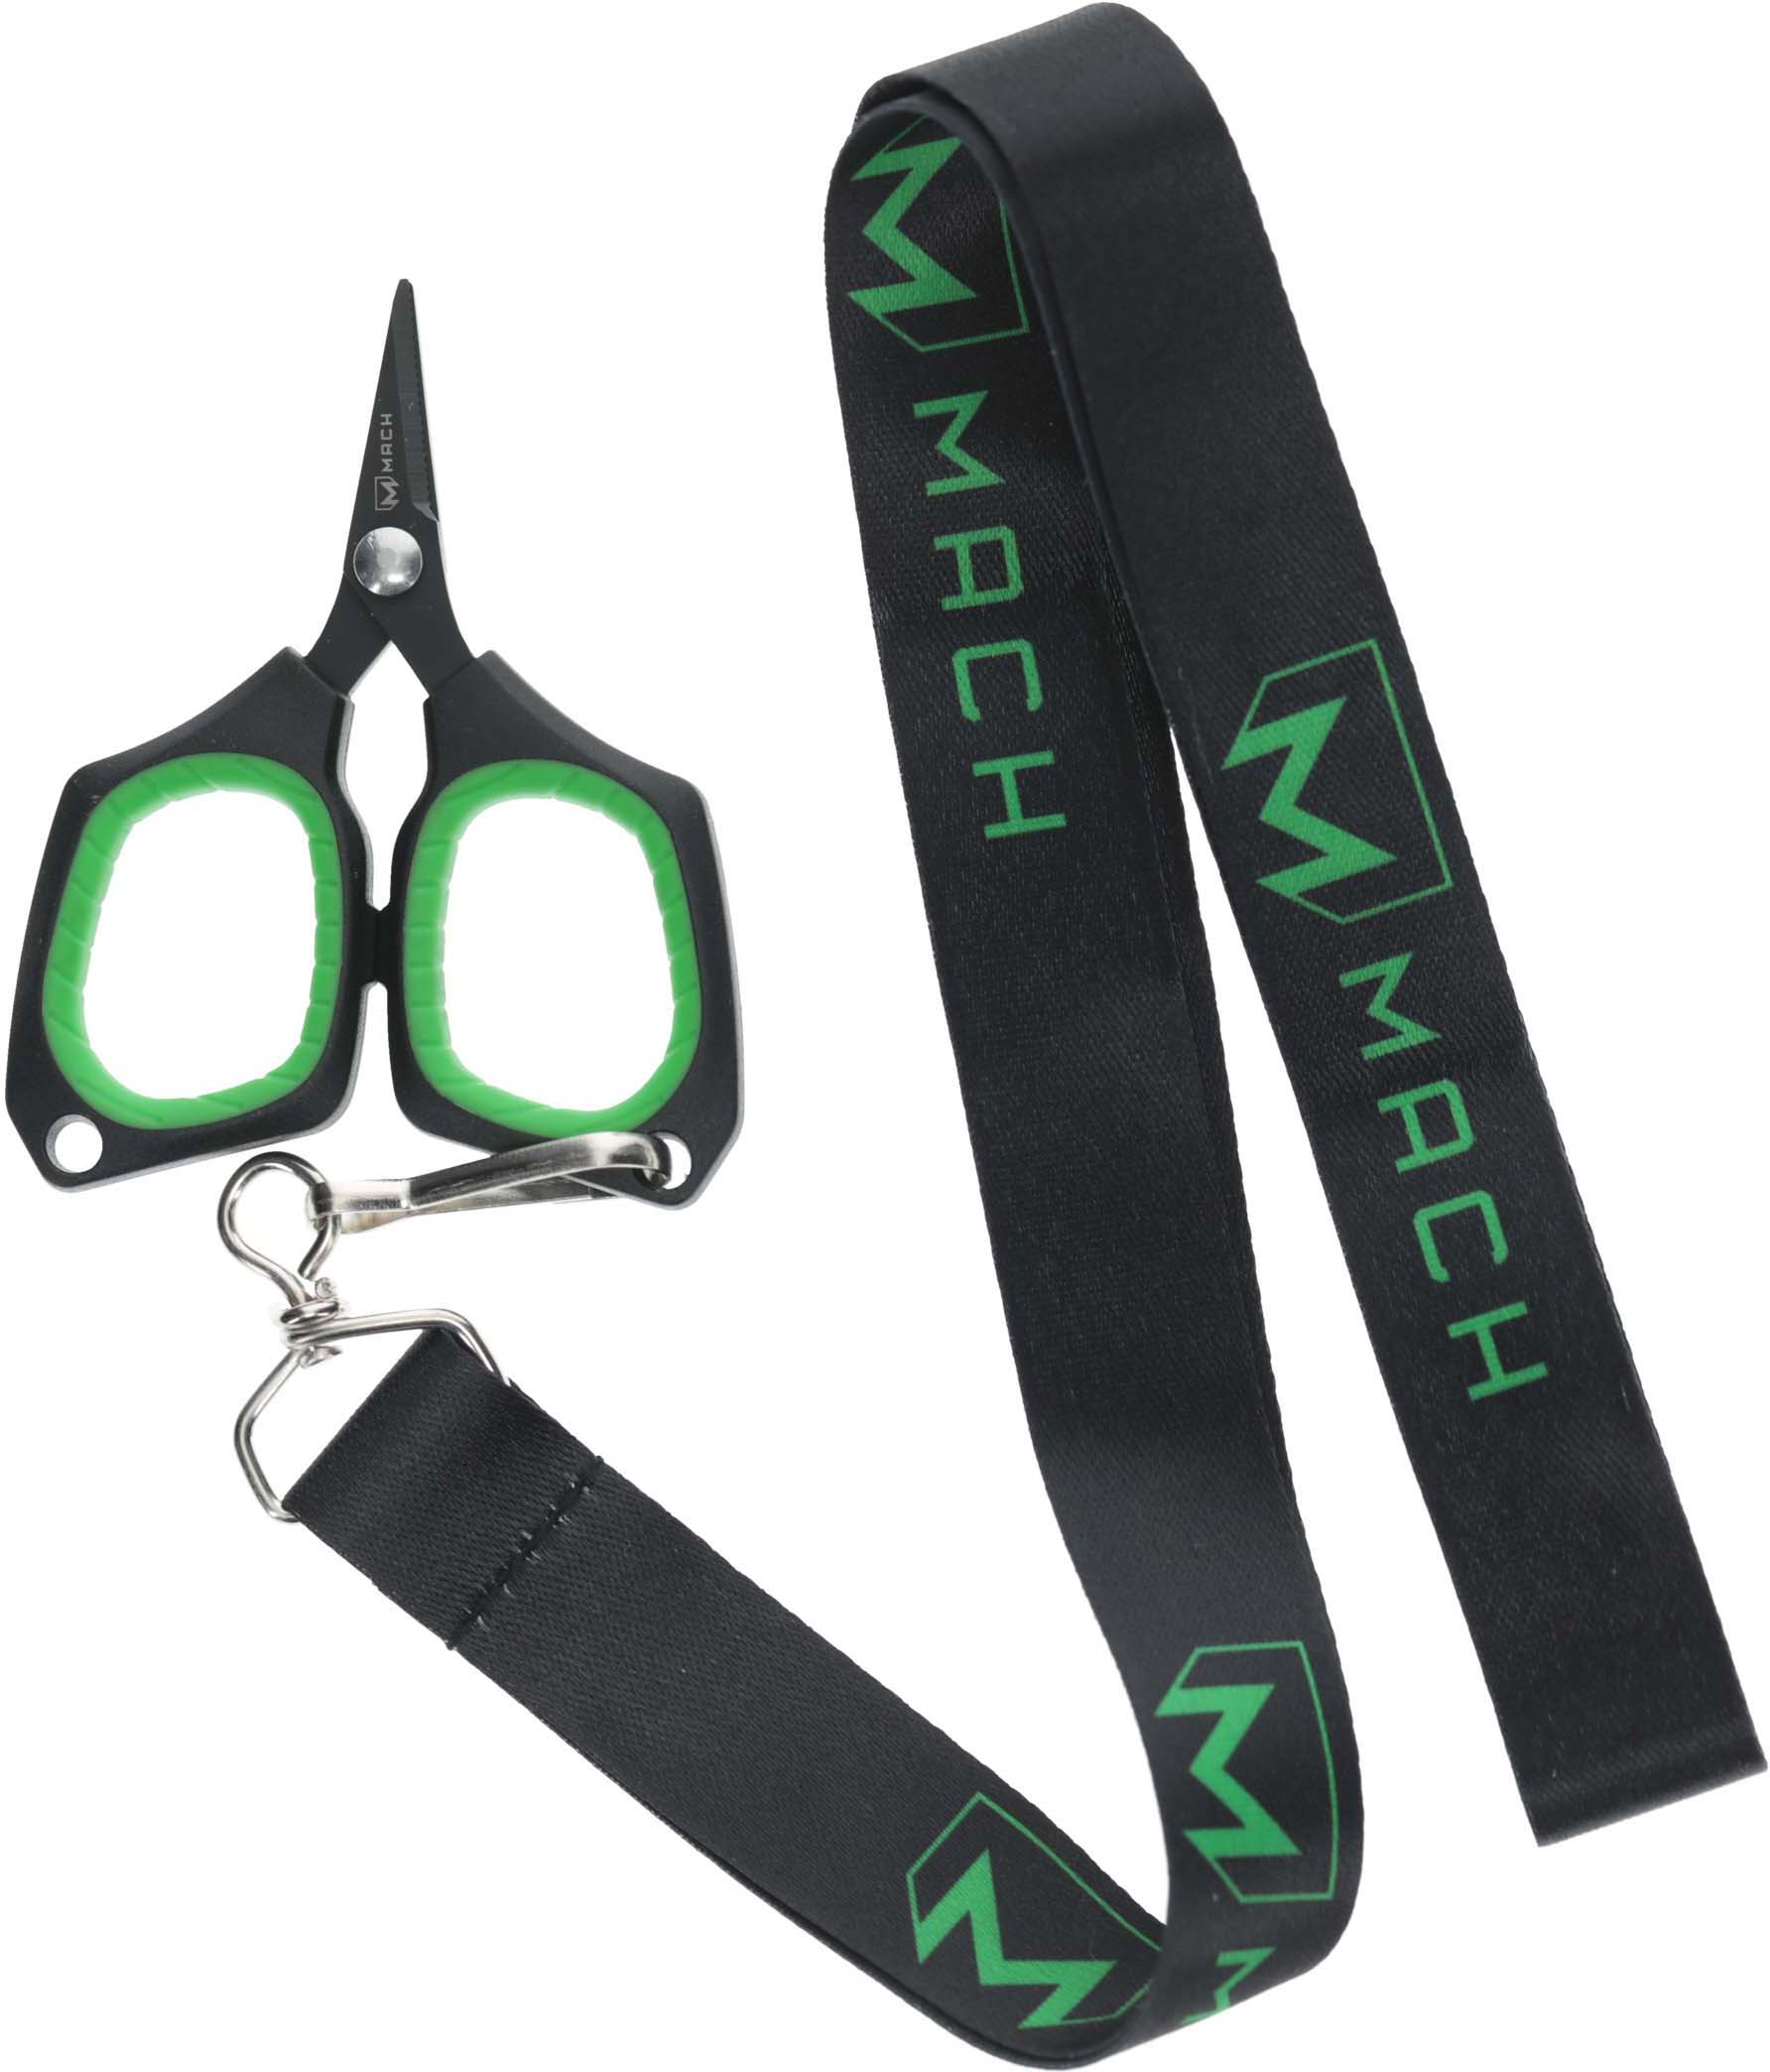 MACH 3in Braid Scissors with Squeeze Sheath and Lanyard